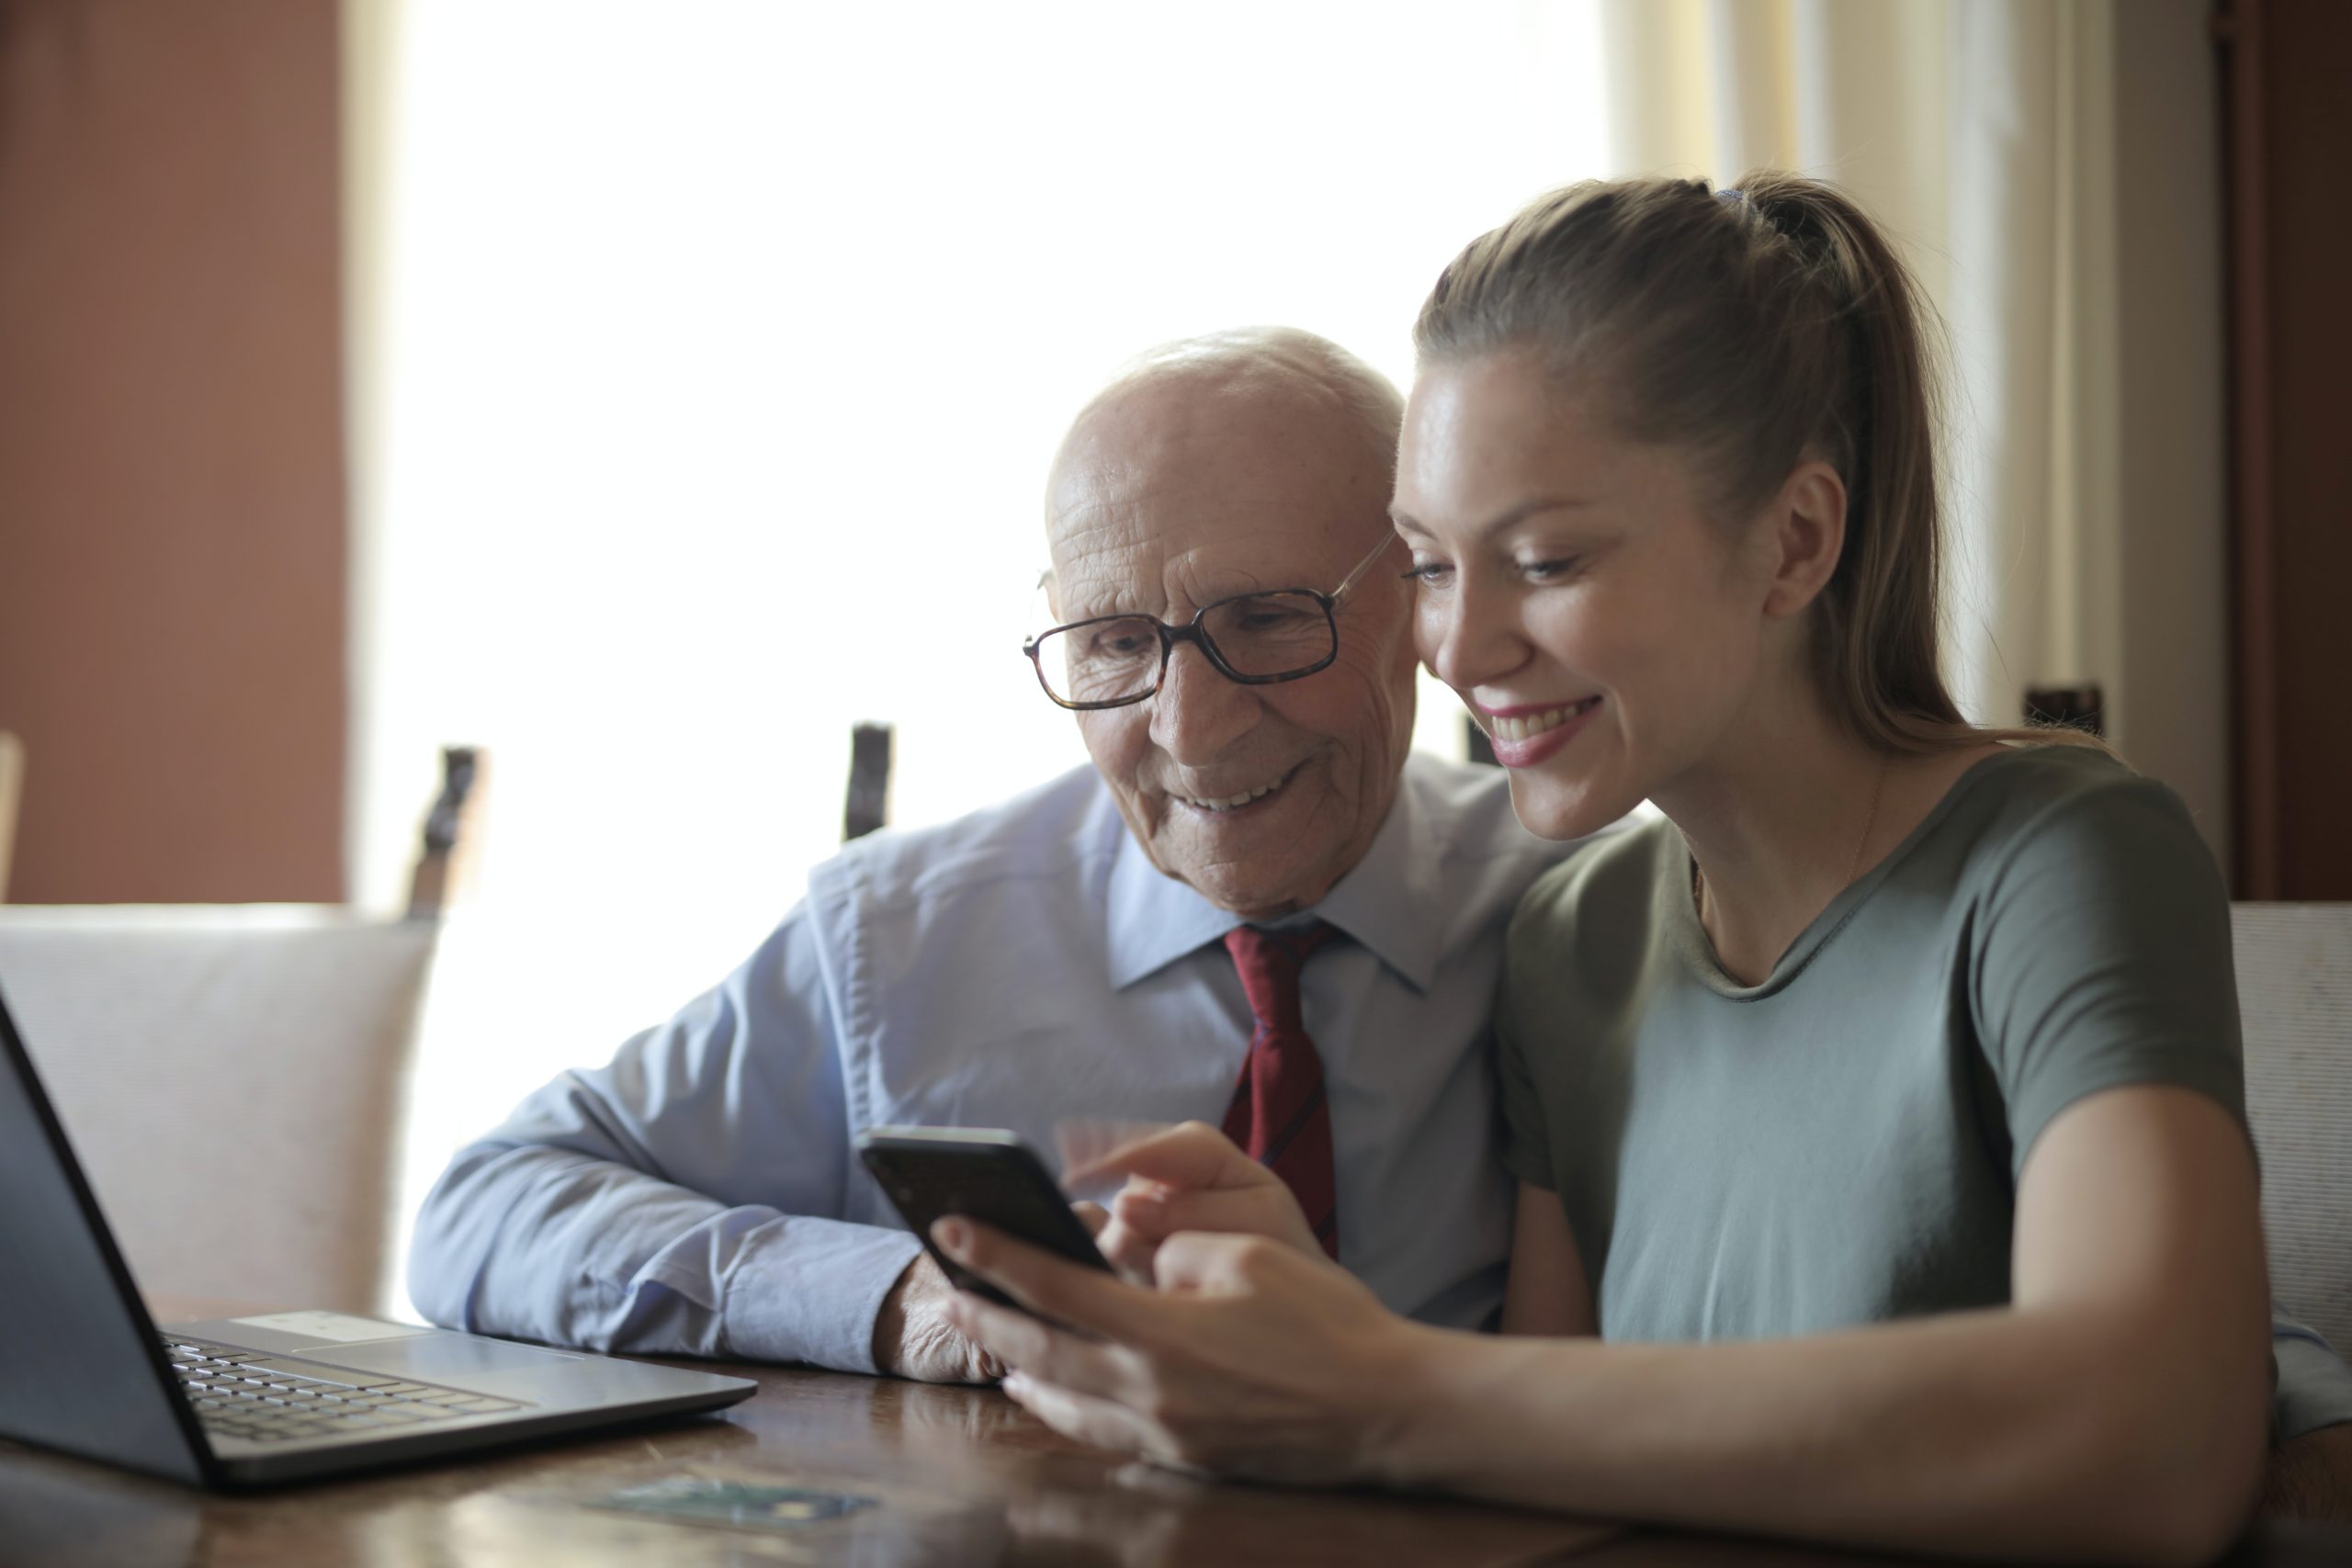 Older man and younger woman looking at phone